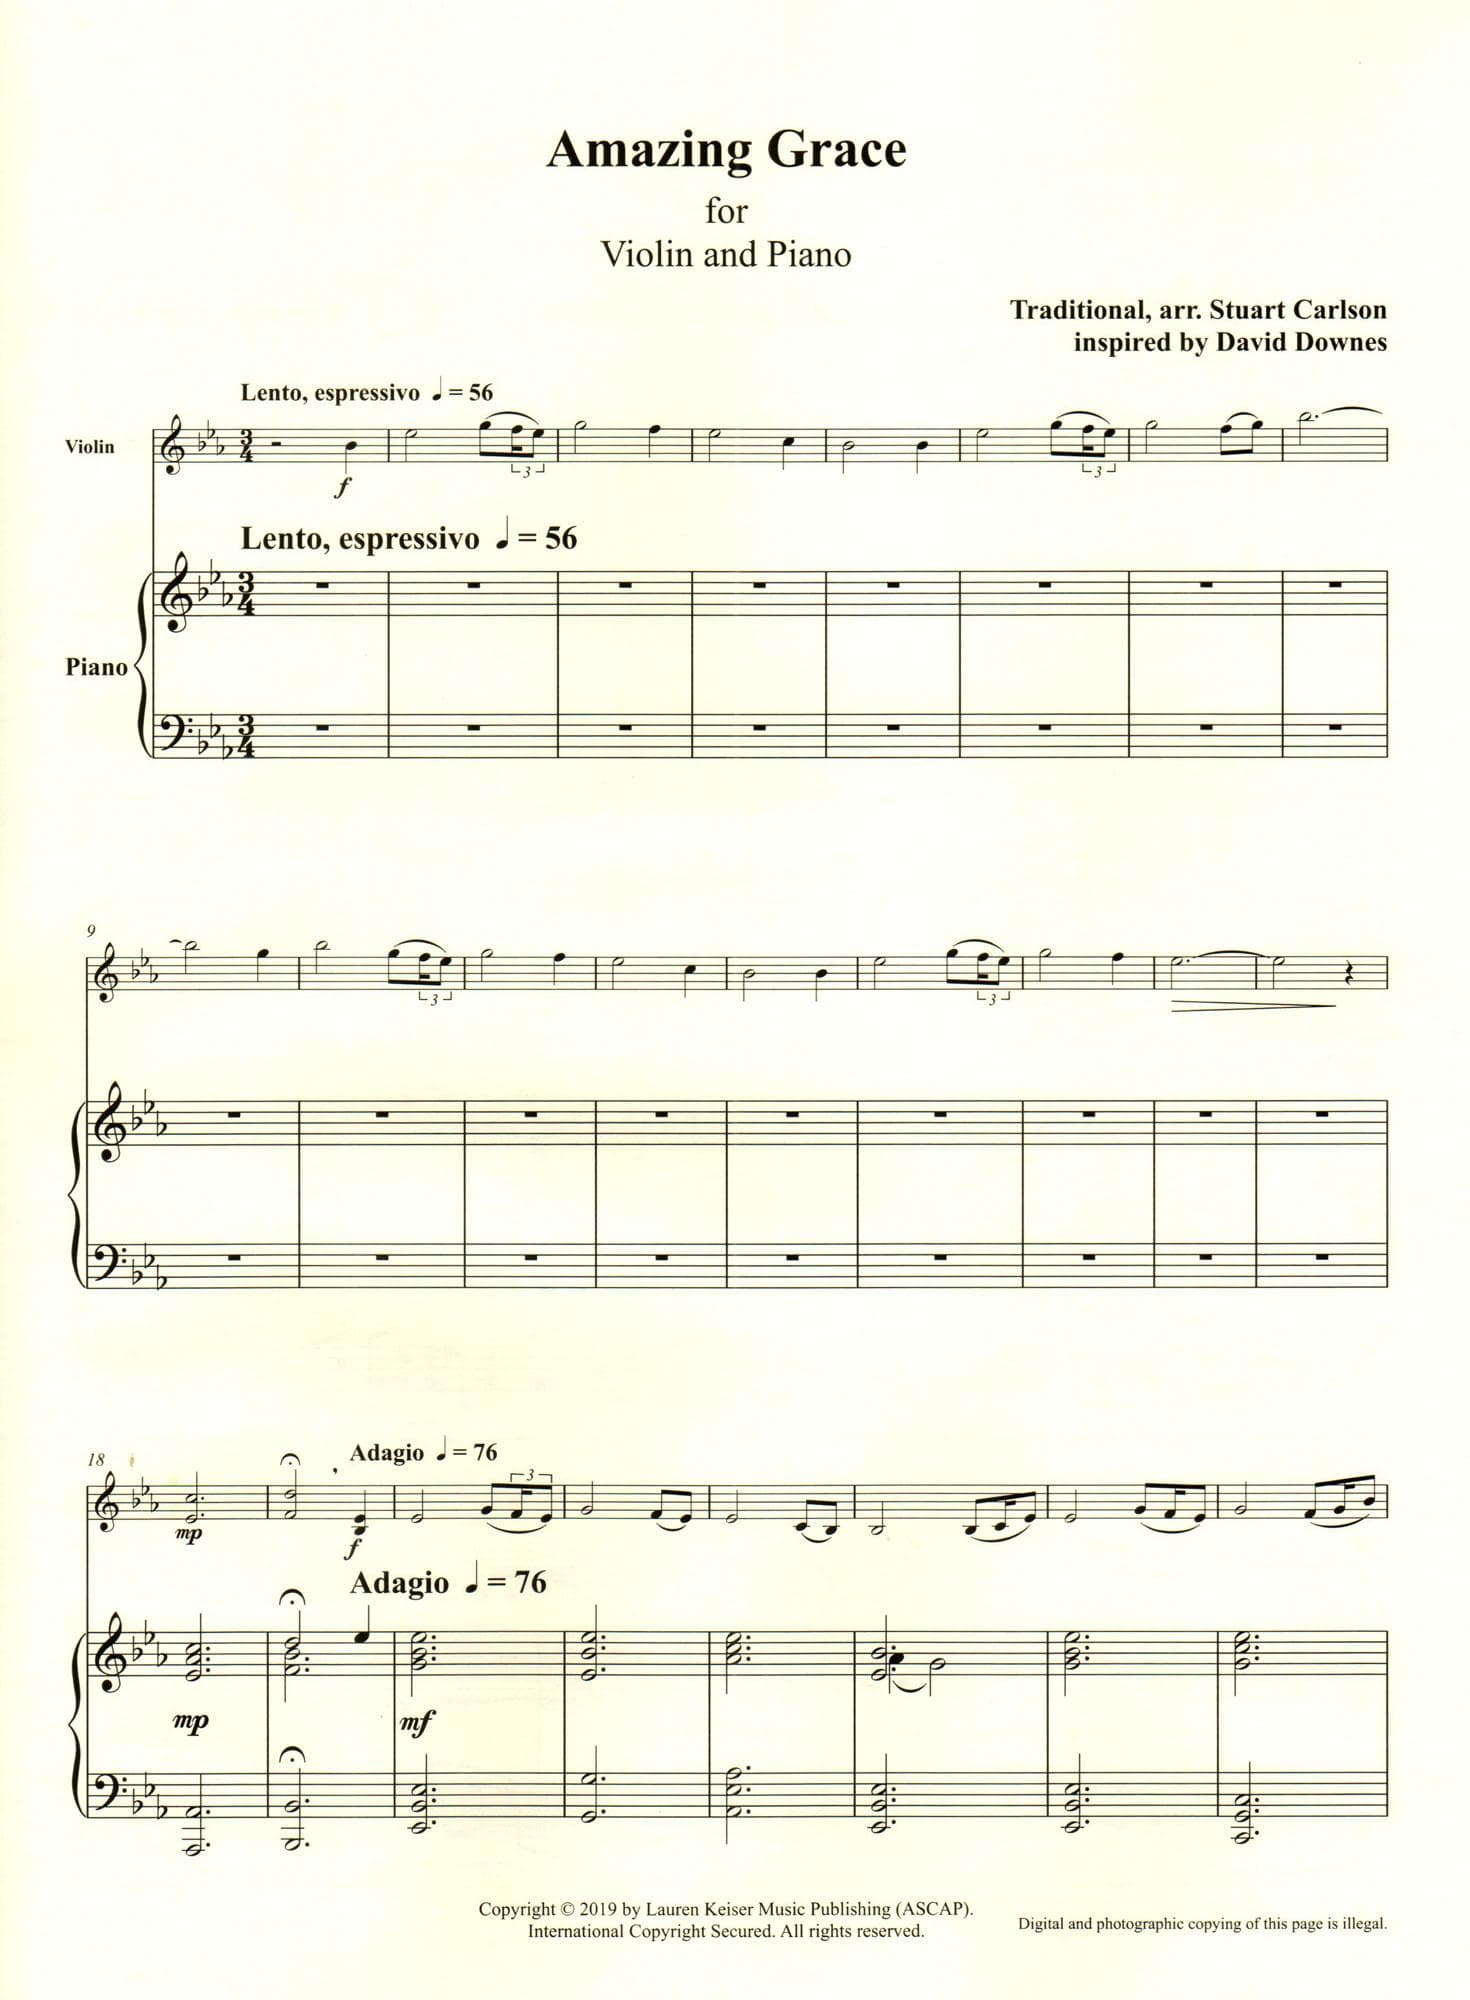 Amazing Grace - for Violin and Piano - arranged by Stuart Carlson - Lauren Keiser Music Publishing